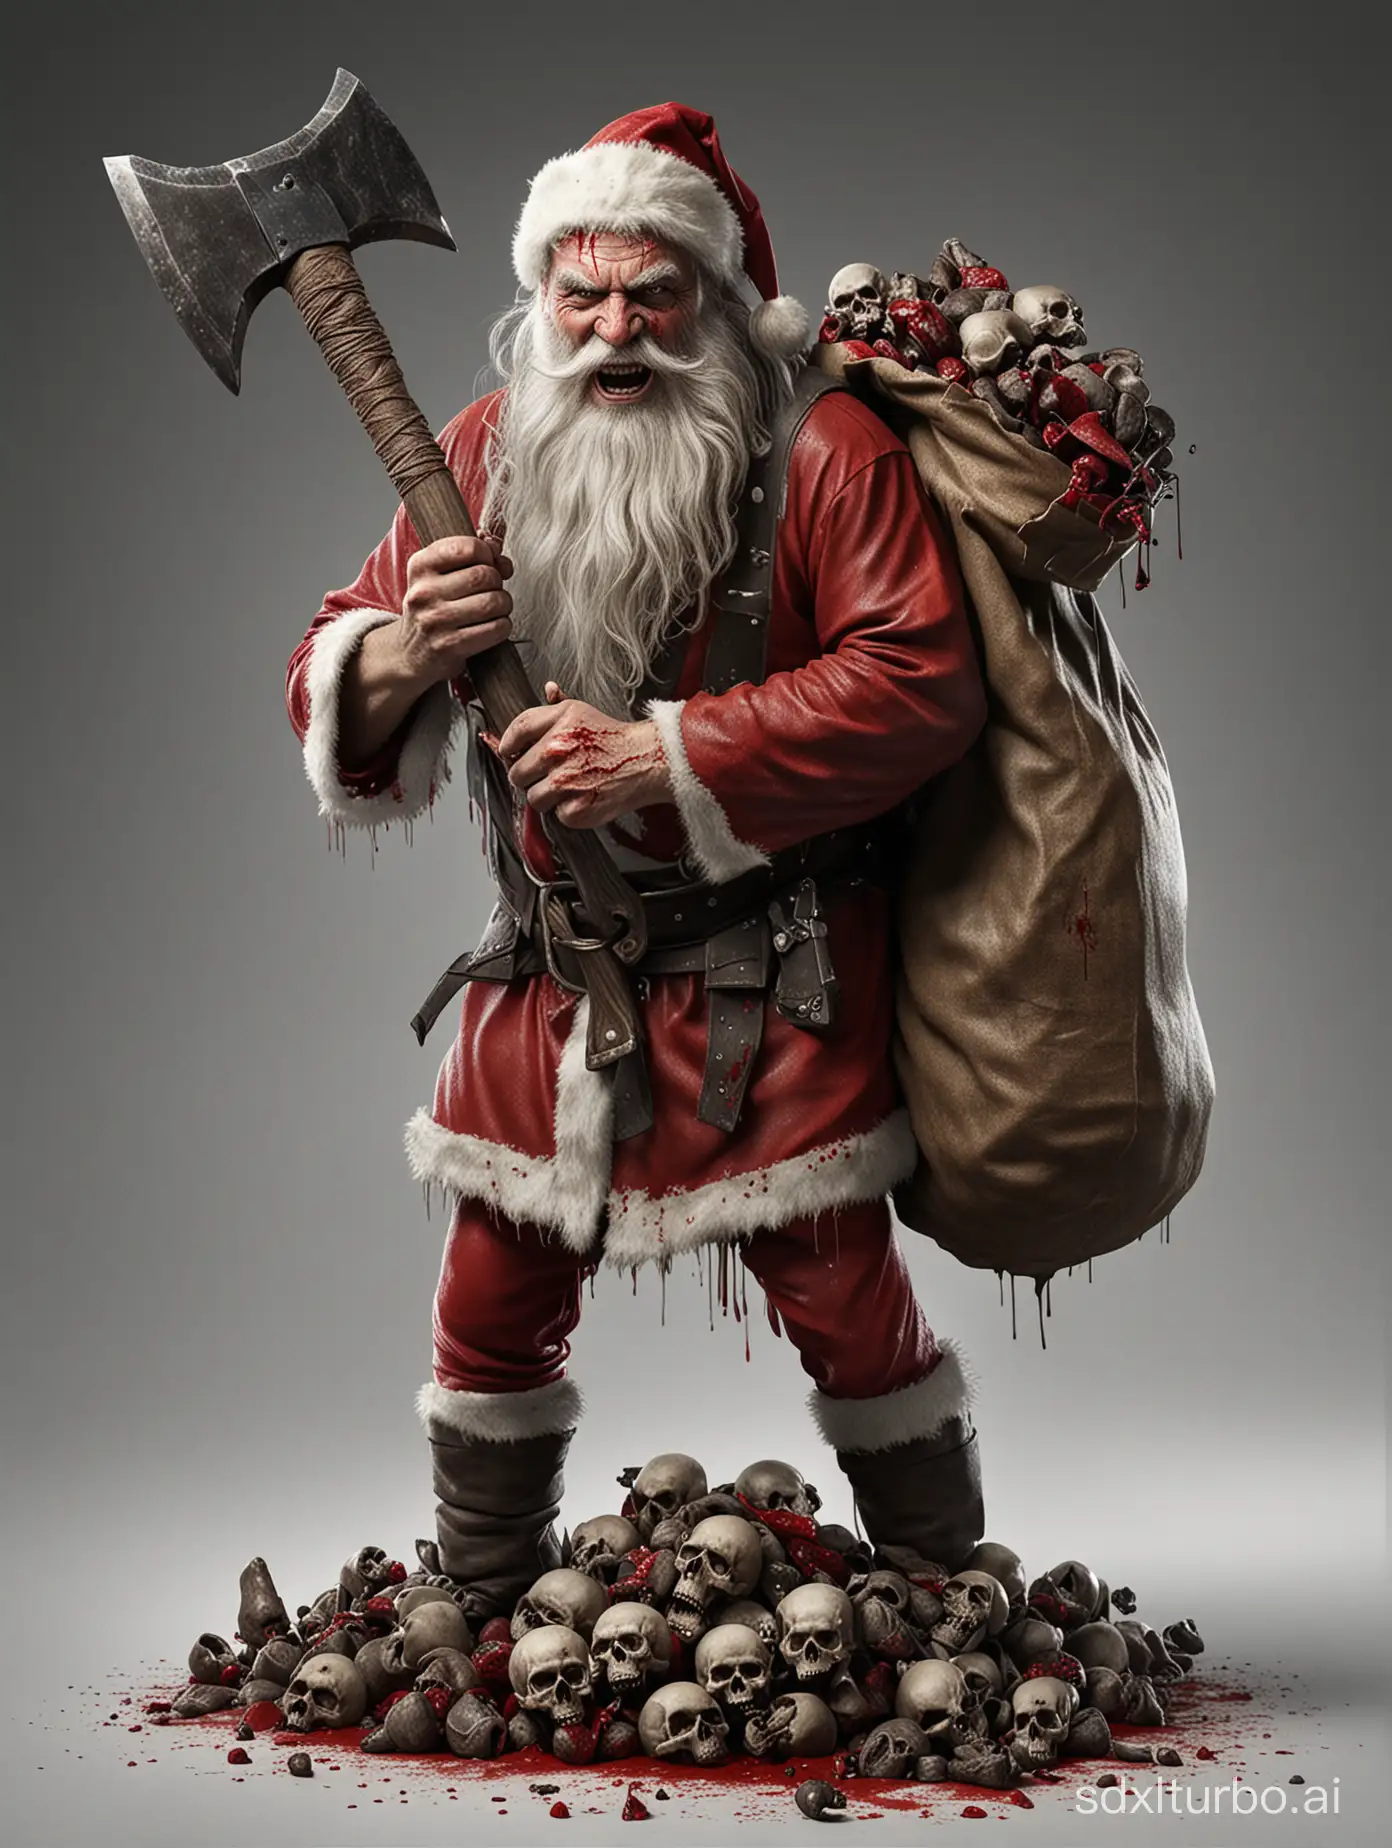 A psychotic evil bloody axe weilding Santa Clause with a sack full of skulls very photo realistic high resolution imaging.